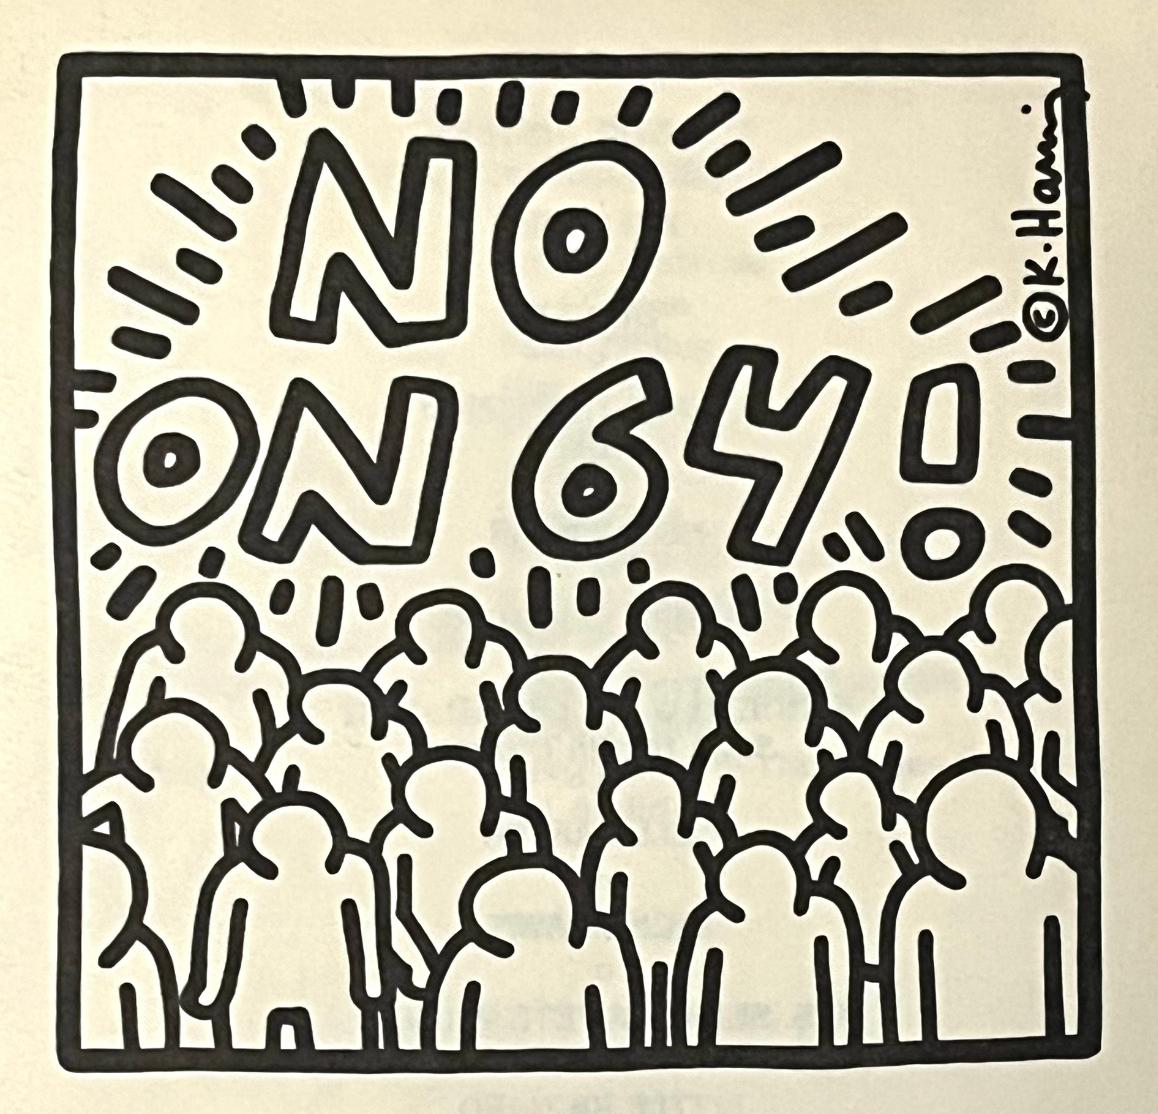 Keith Haring ‘No On 64’ (Keith Haring 1986):
A rare vintage 1986 Keith Haring activist announcement illustrated by Haring in effort to denounce California's Proposition 64. Proponents of the then ballot, argued that the measure would merely return